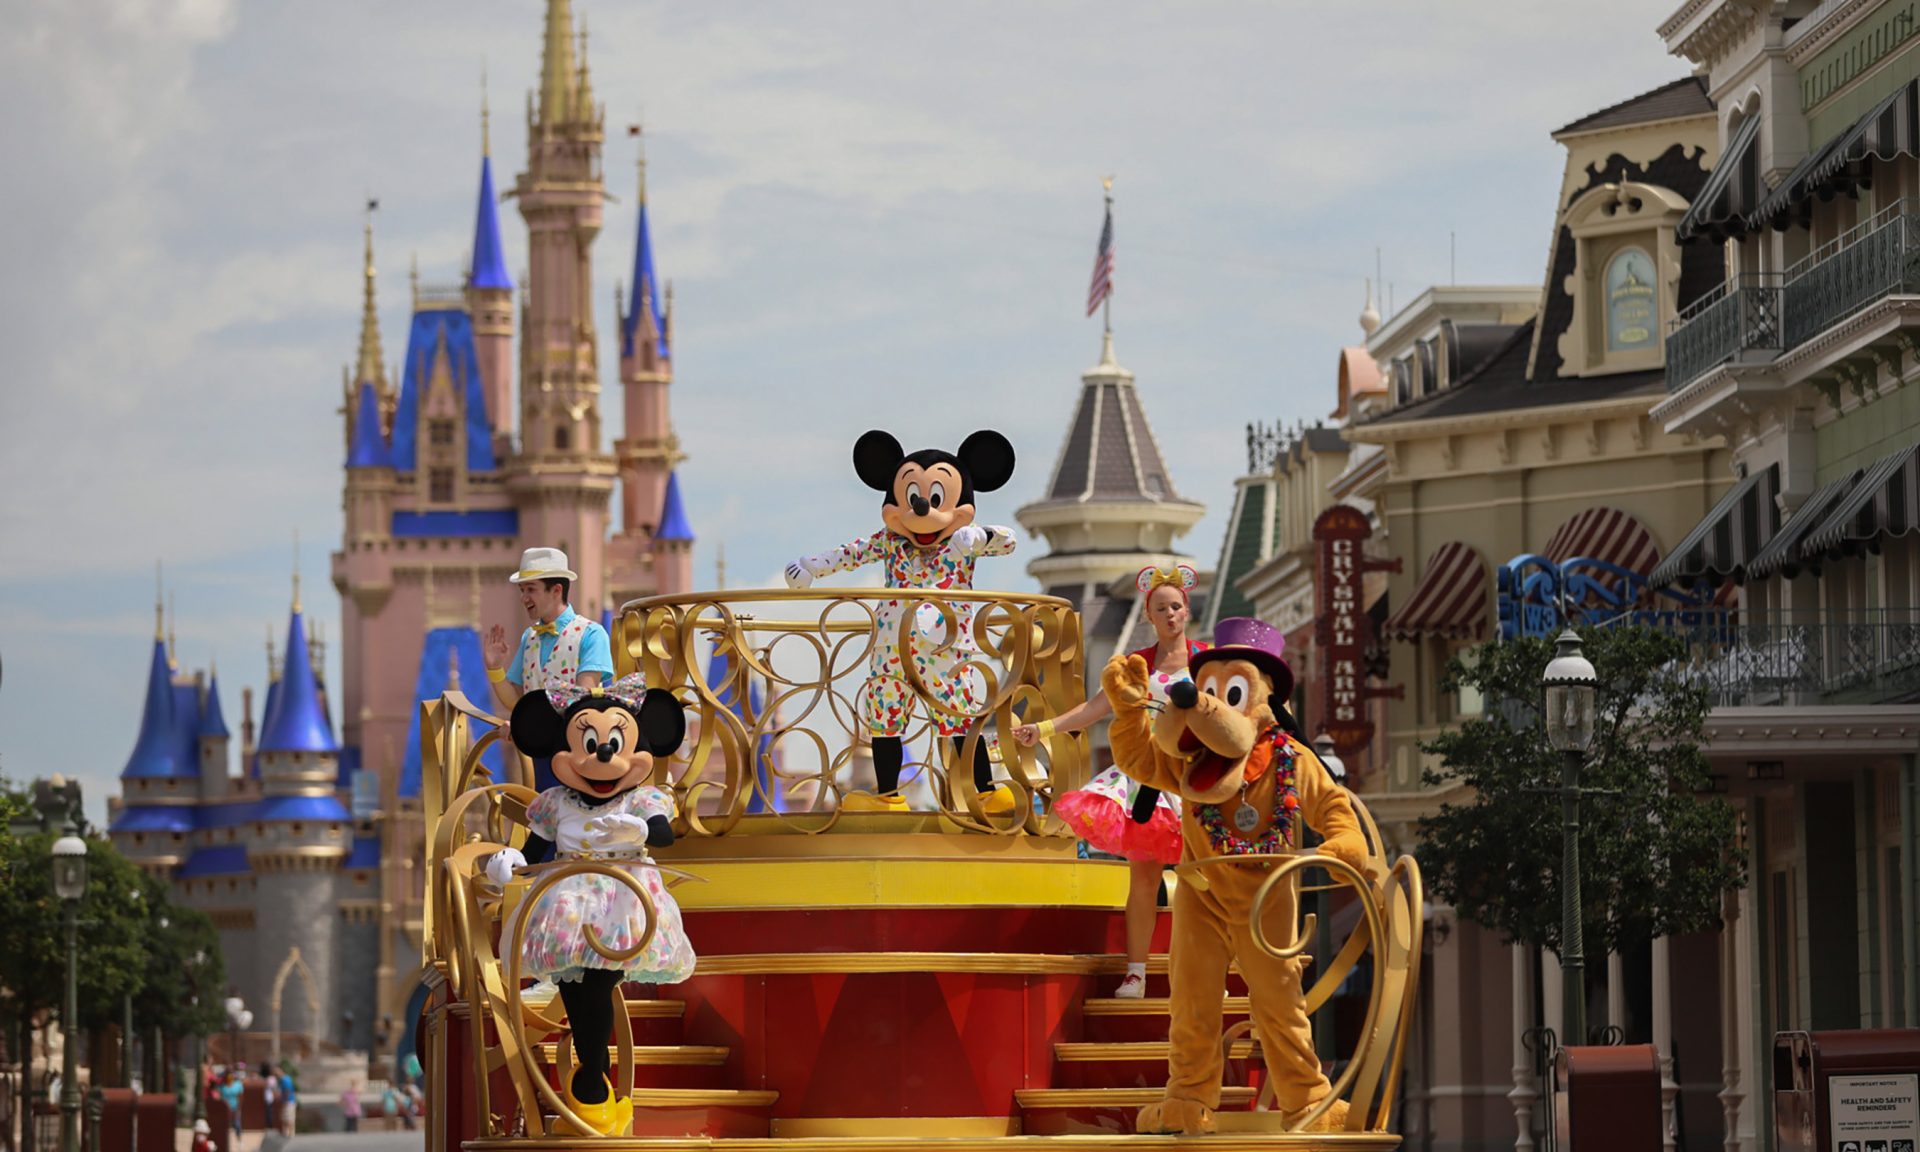 42 Disney World and Disneyland Tips for a Magical Vacation